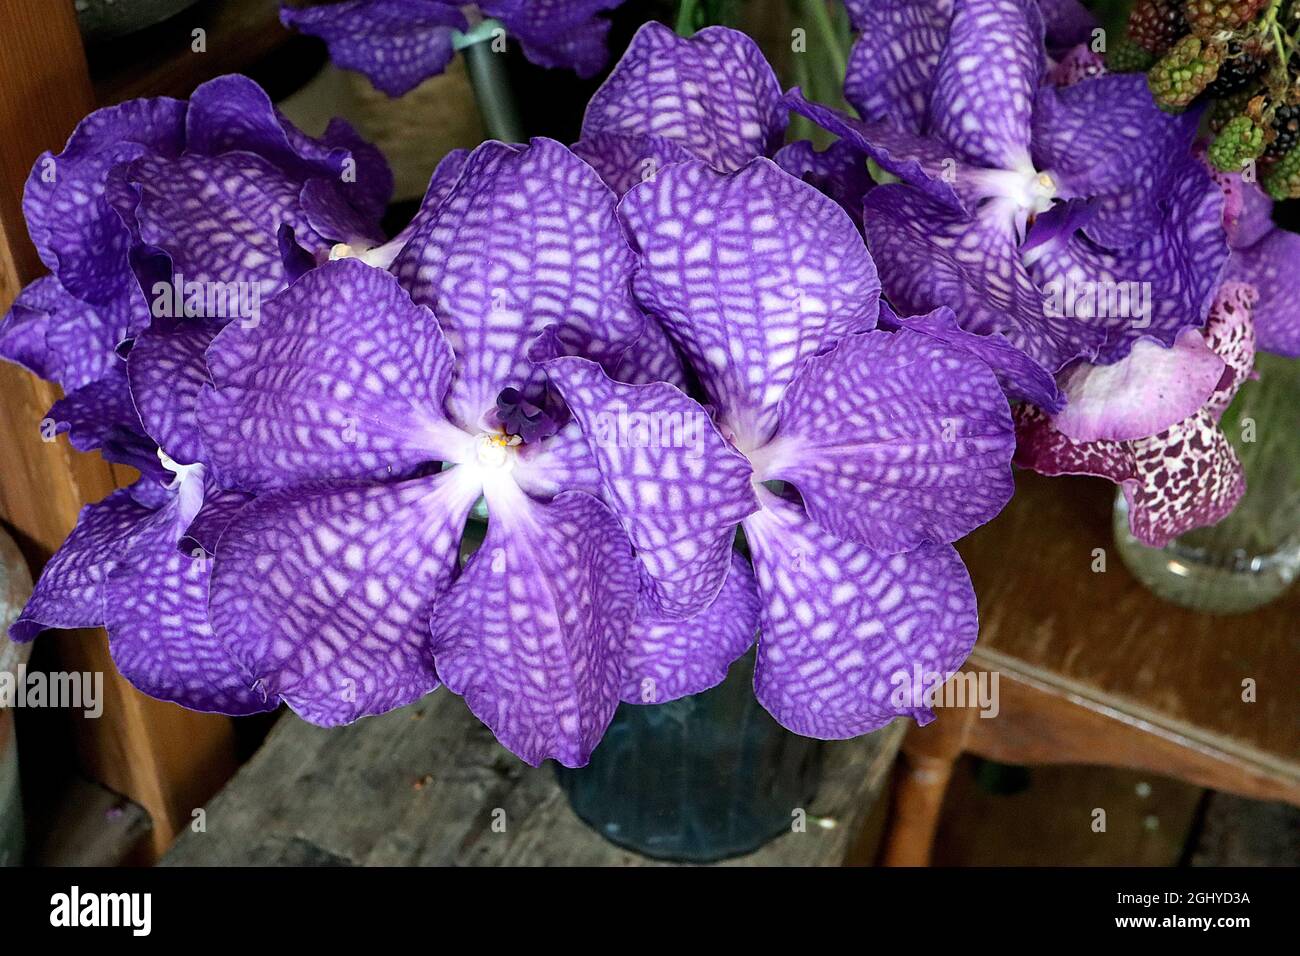 Orchid Vanda Betty Blue Vanda Orchid Betty Blue – white saucer-shaped flowers with violet netting,  August, England, UK Stock Photo